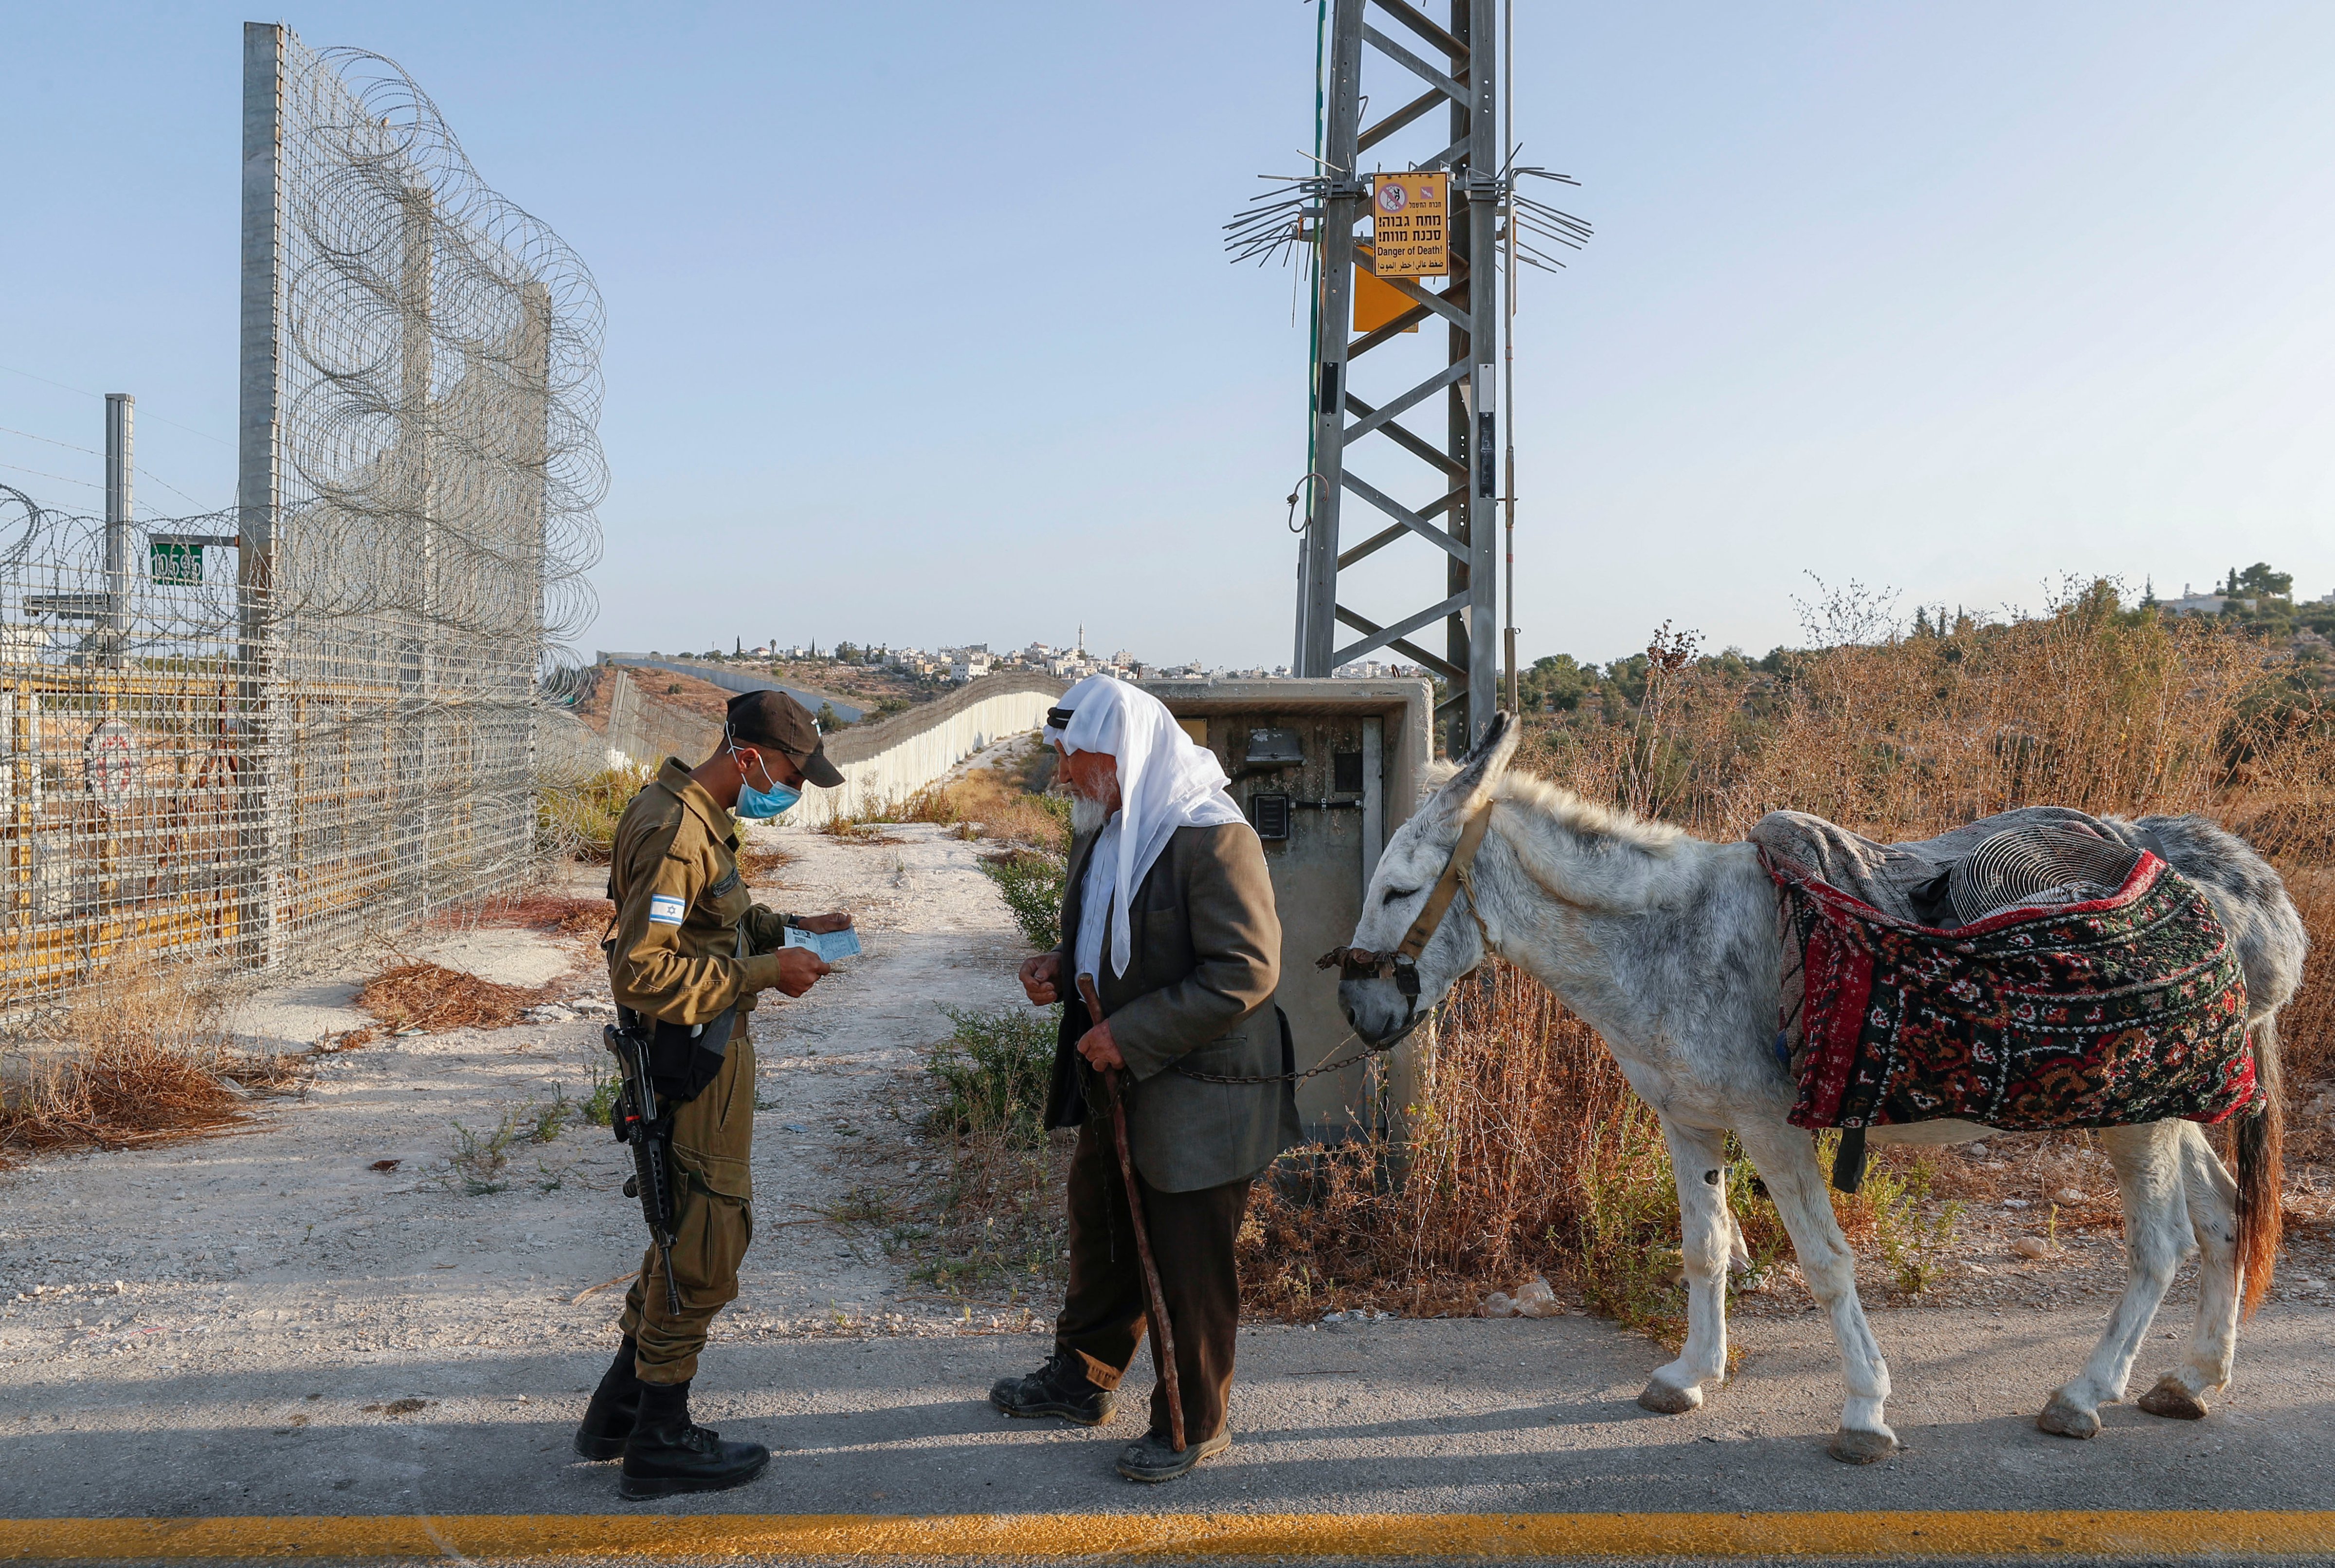 An Israeli soldier checks the authorisation of a Palestinian man taking his donkey to harvest olives on his land, which was divided by Israel's controversial separation barrier, near the West Bank village of Bayt Awwa, on October 12, 2020. (Emmanuel Dunand—AFP /Getty Images)